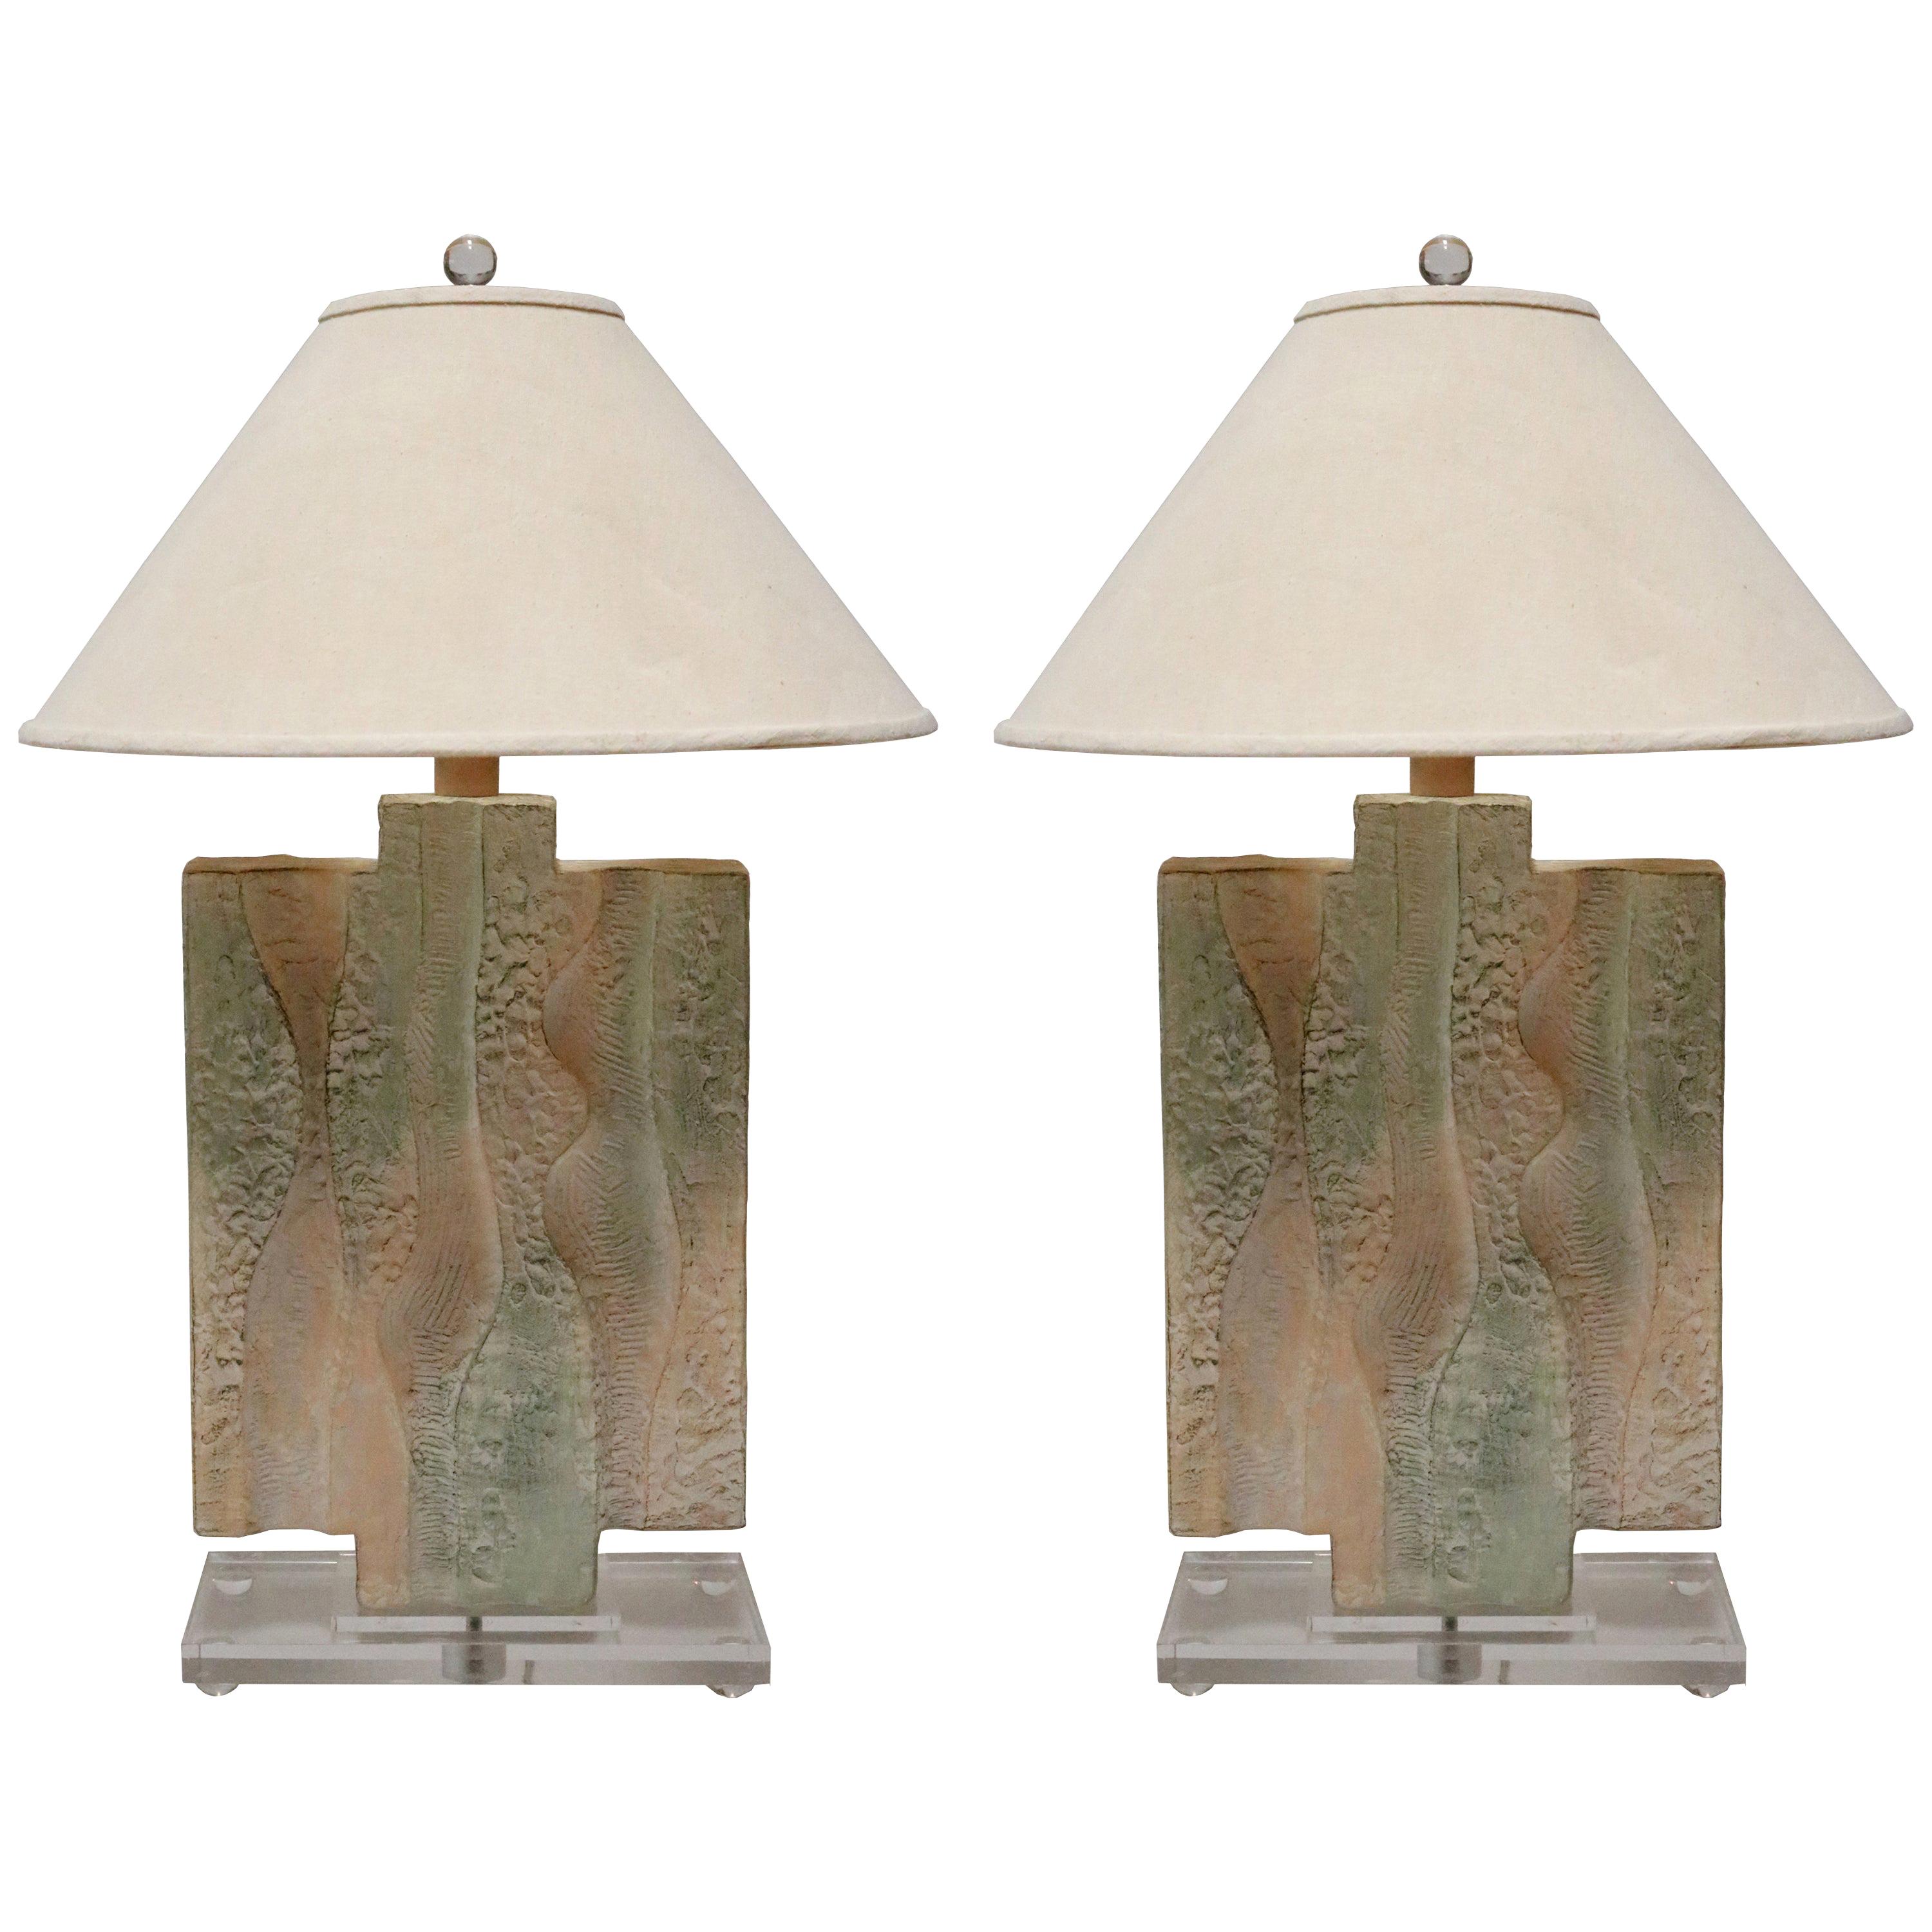 Textured Pastel Colored Table Lamps on a Lucite Base, a Pair